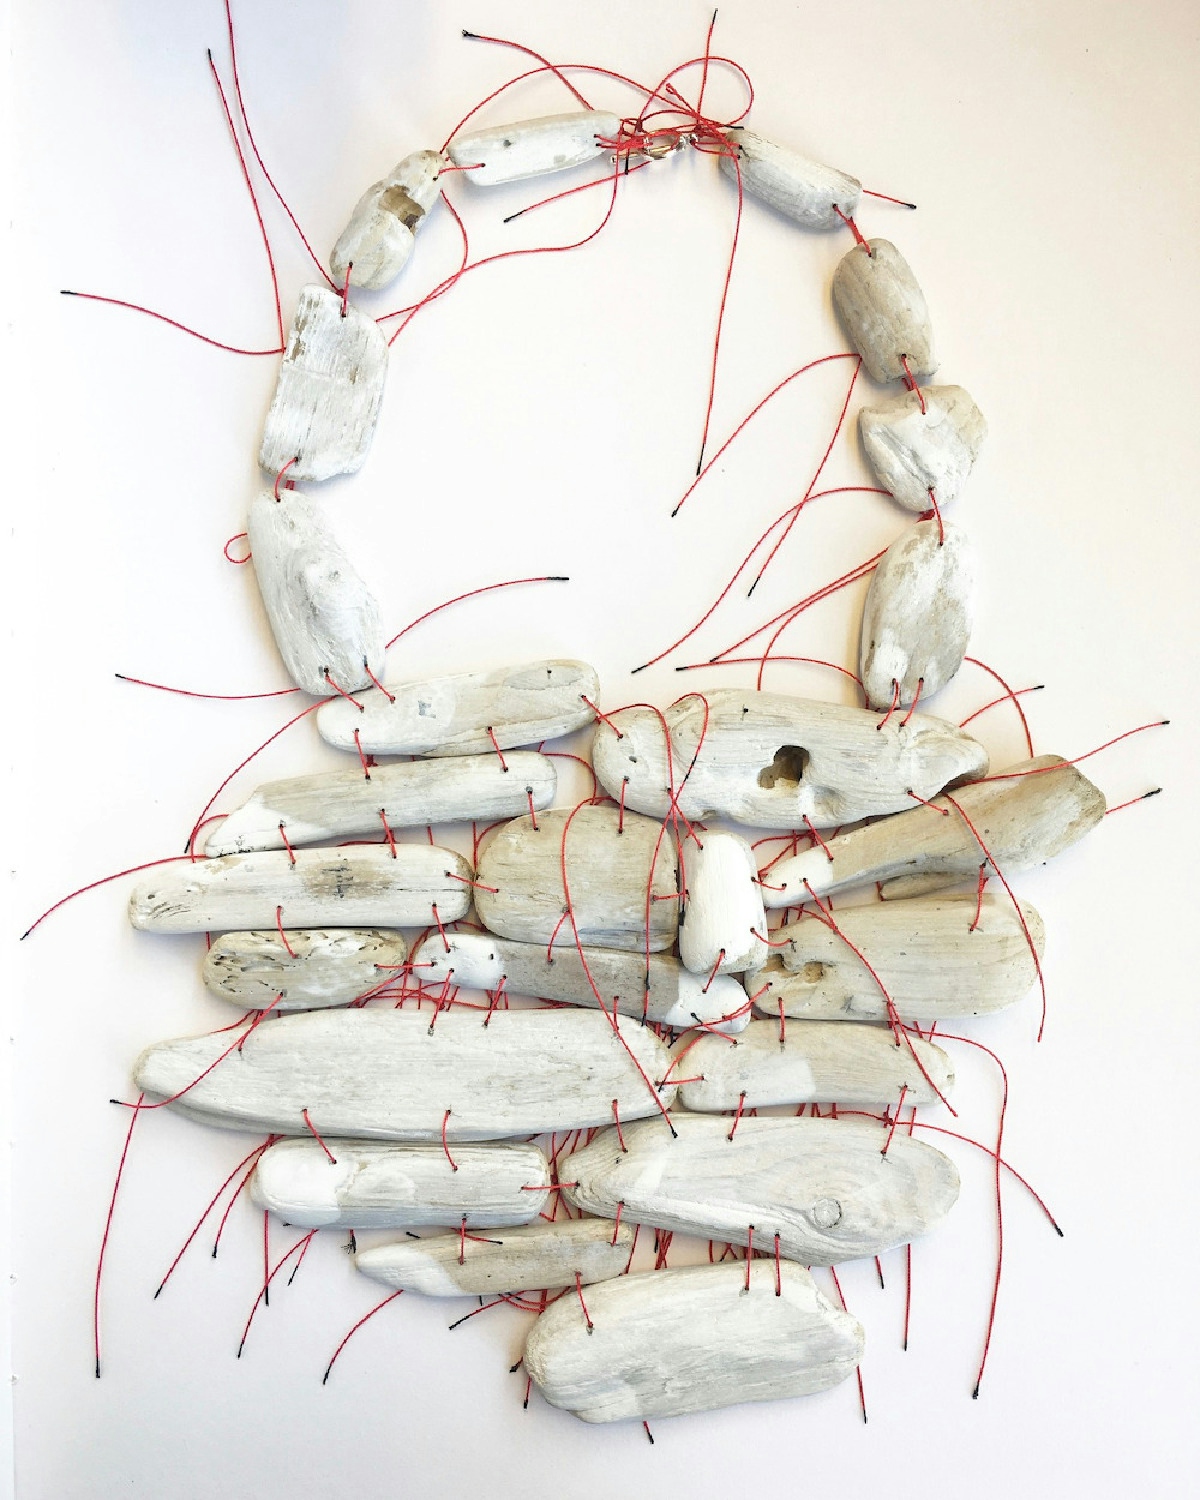 "Underneath the surface", Necklace. Driftwood and silk. 2018